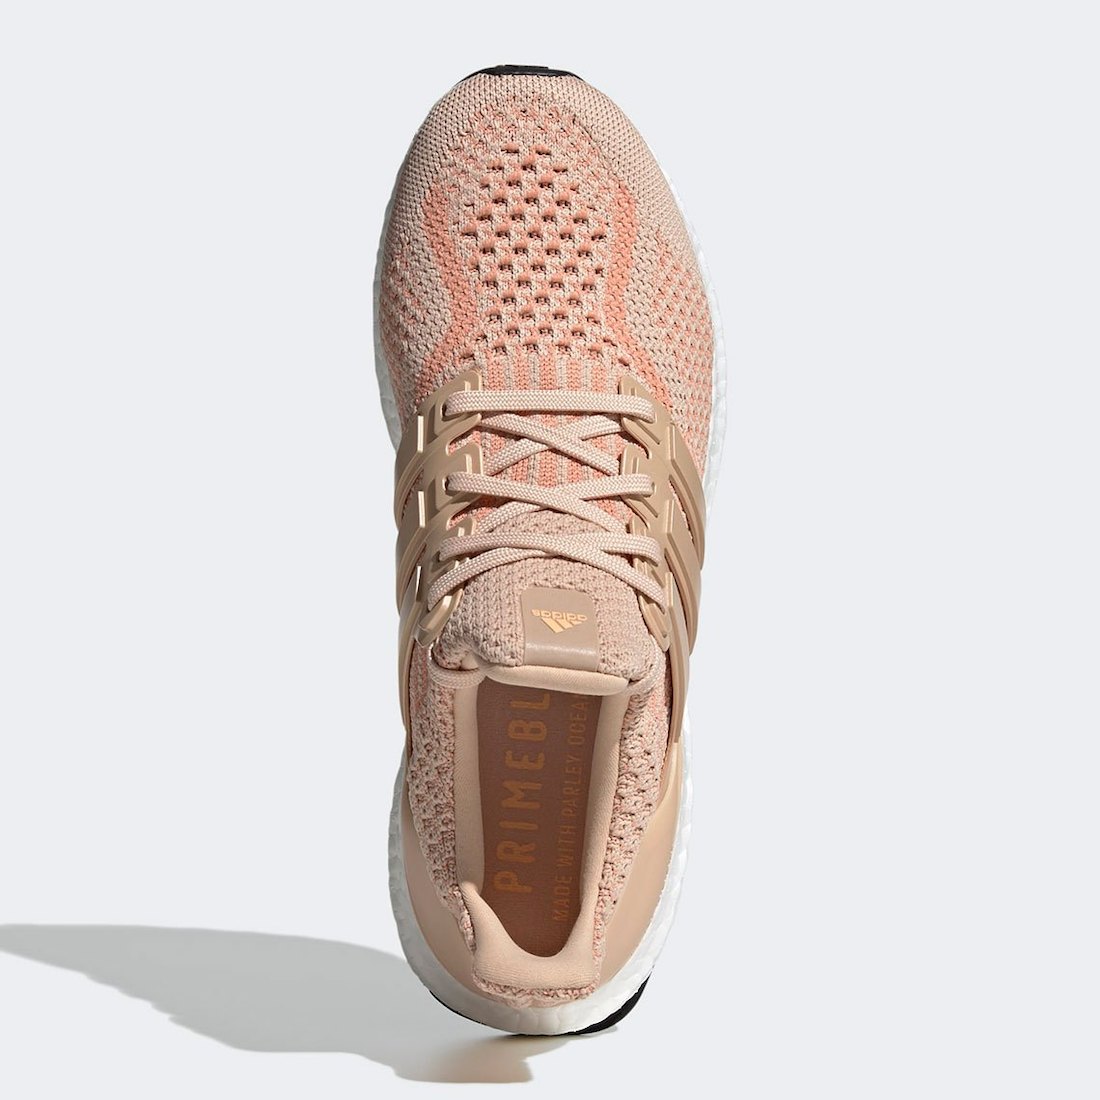 adidas Ultra Boost 5.0 DNA Halo Blush WMNS FZ3977 Release Date